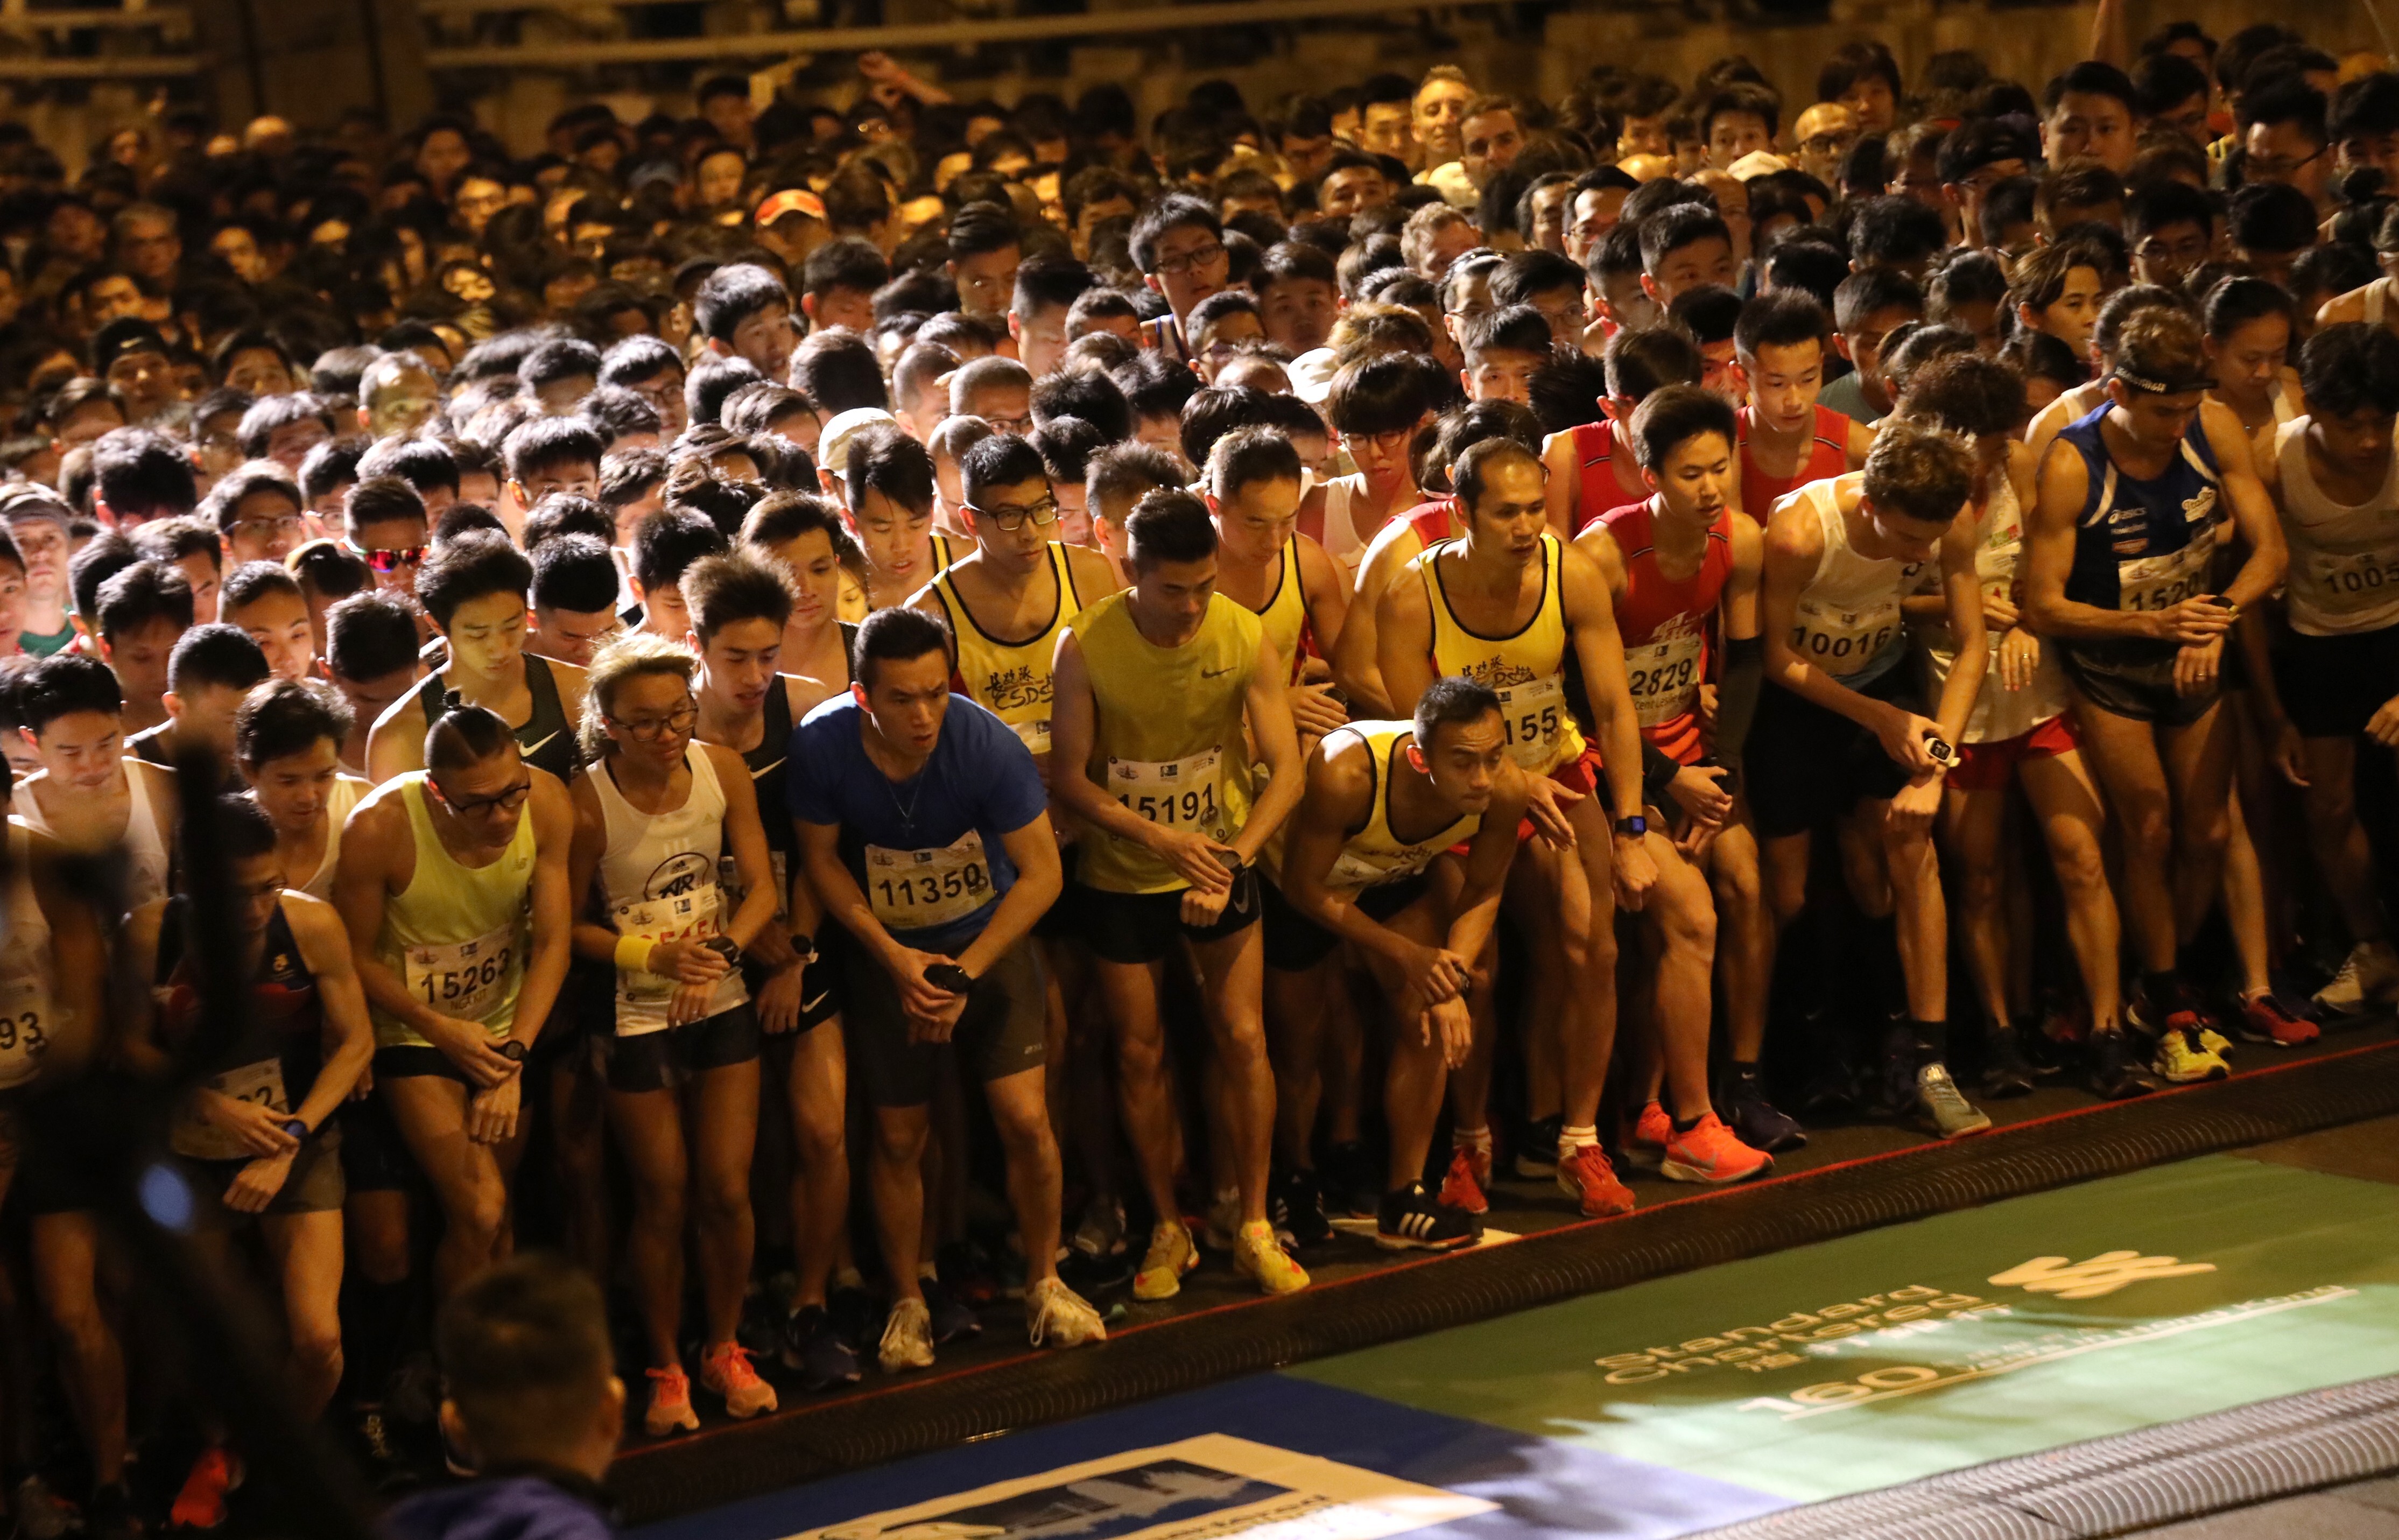 Road race events are always popular in Hong Kong, but they have not been held here for 14 months because of the pandemic. Photo: Felix Wong